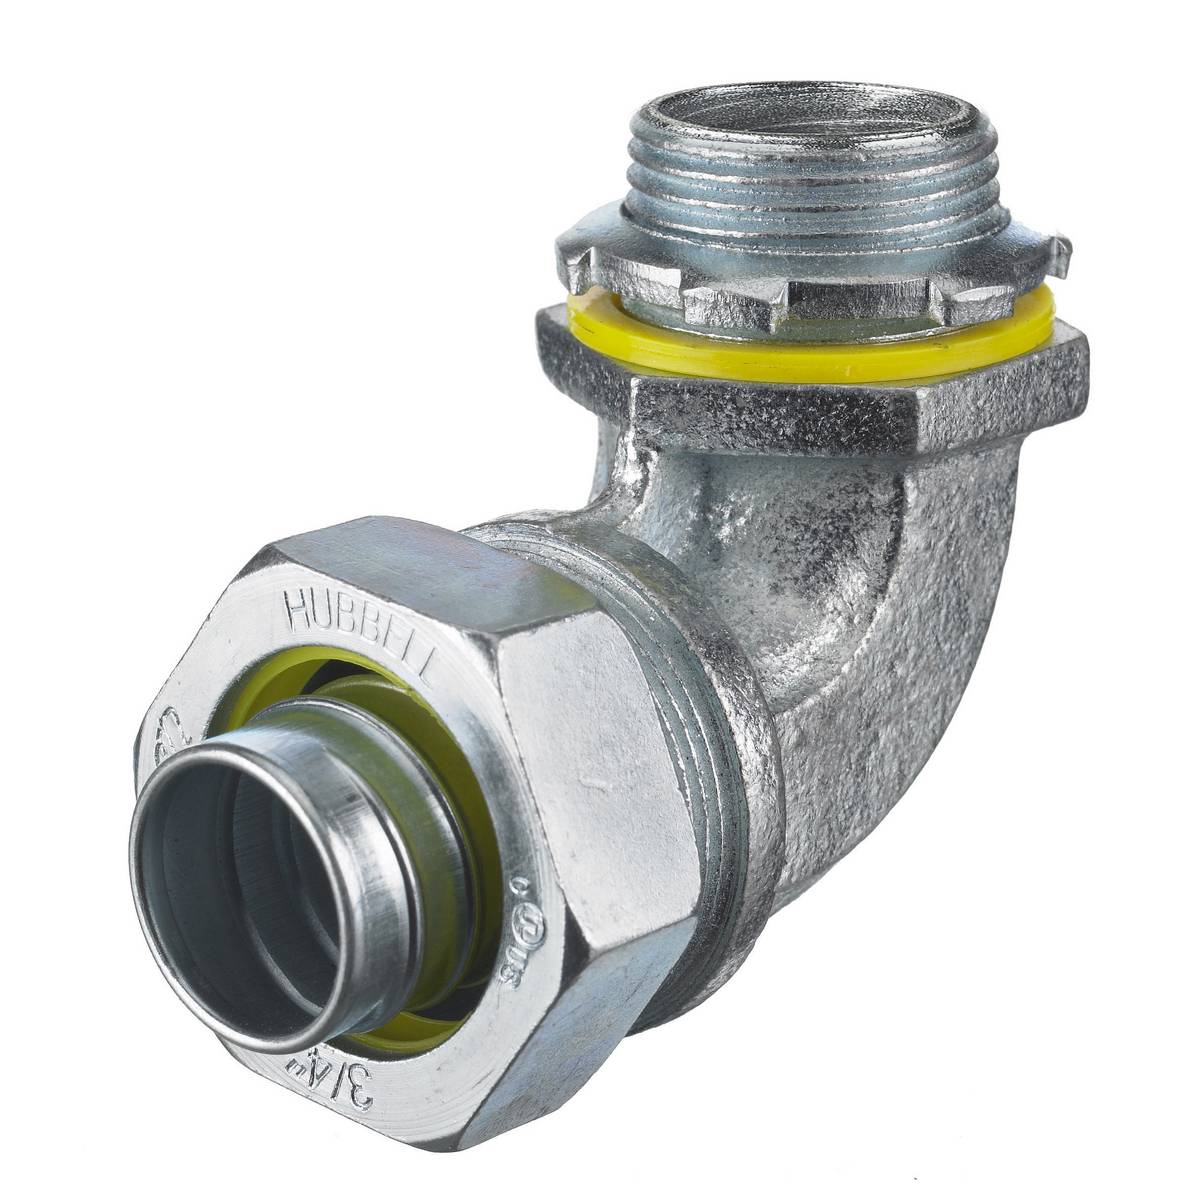 Wiring Device-Kellems H0759 Non-Insulated Male Metallic Liquidtight Connector, 3/4 in Trade, 90 deg, Steel, Zinc Plated